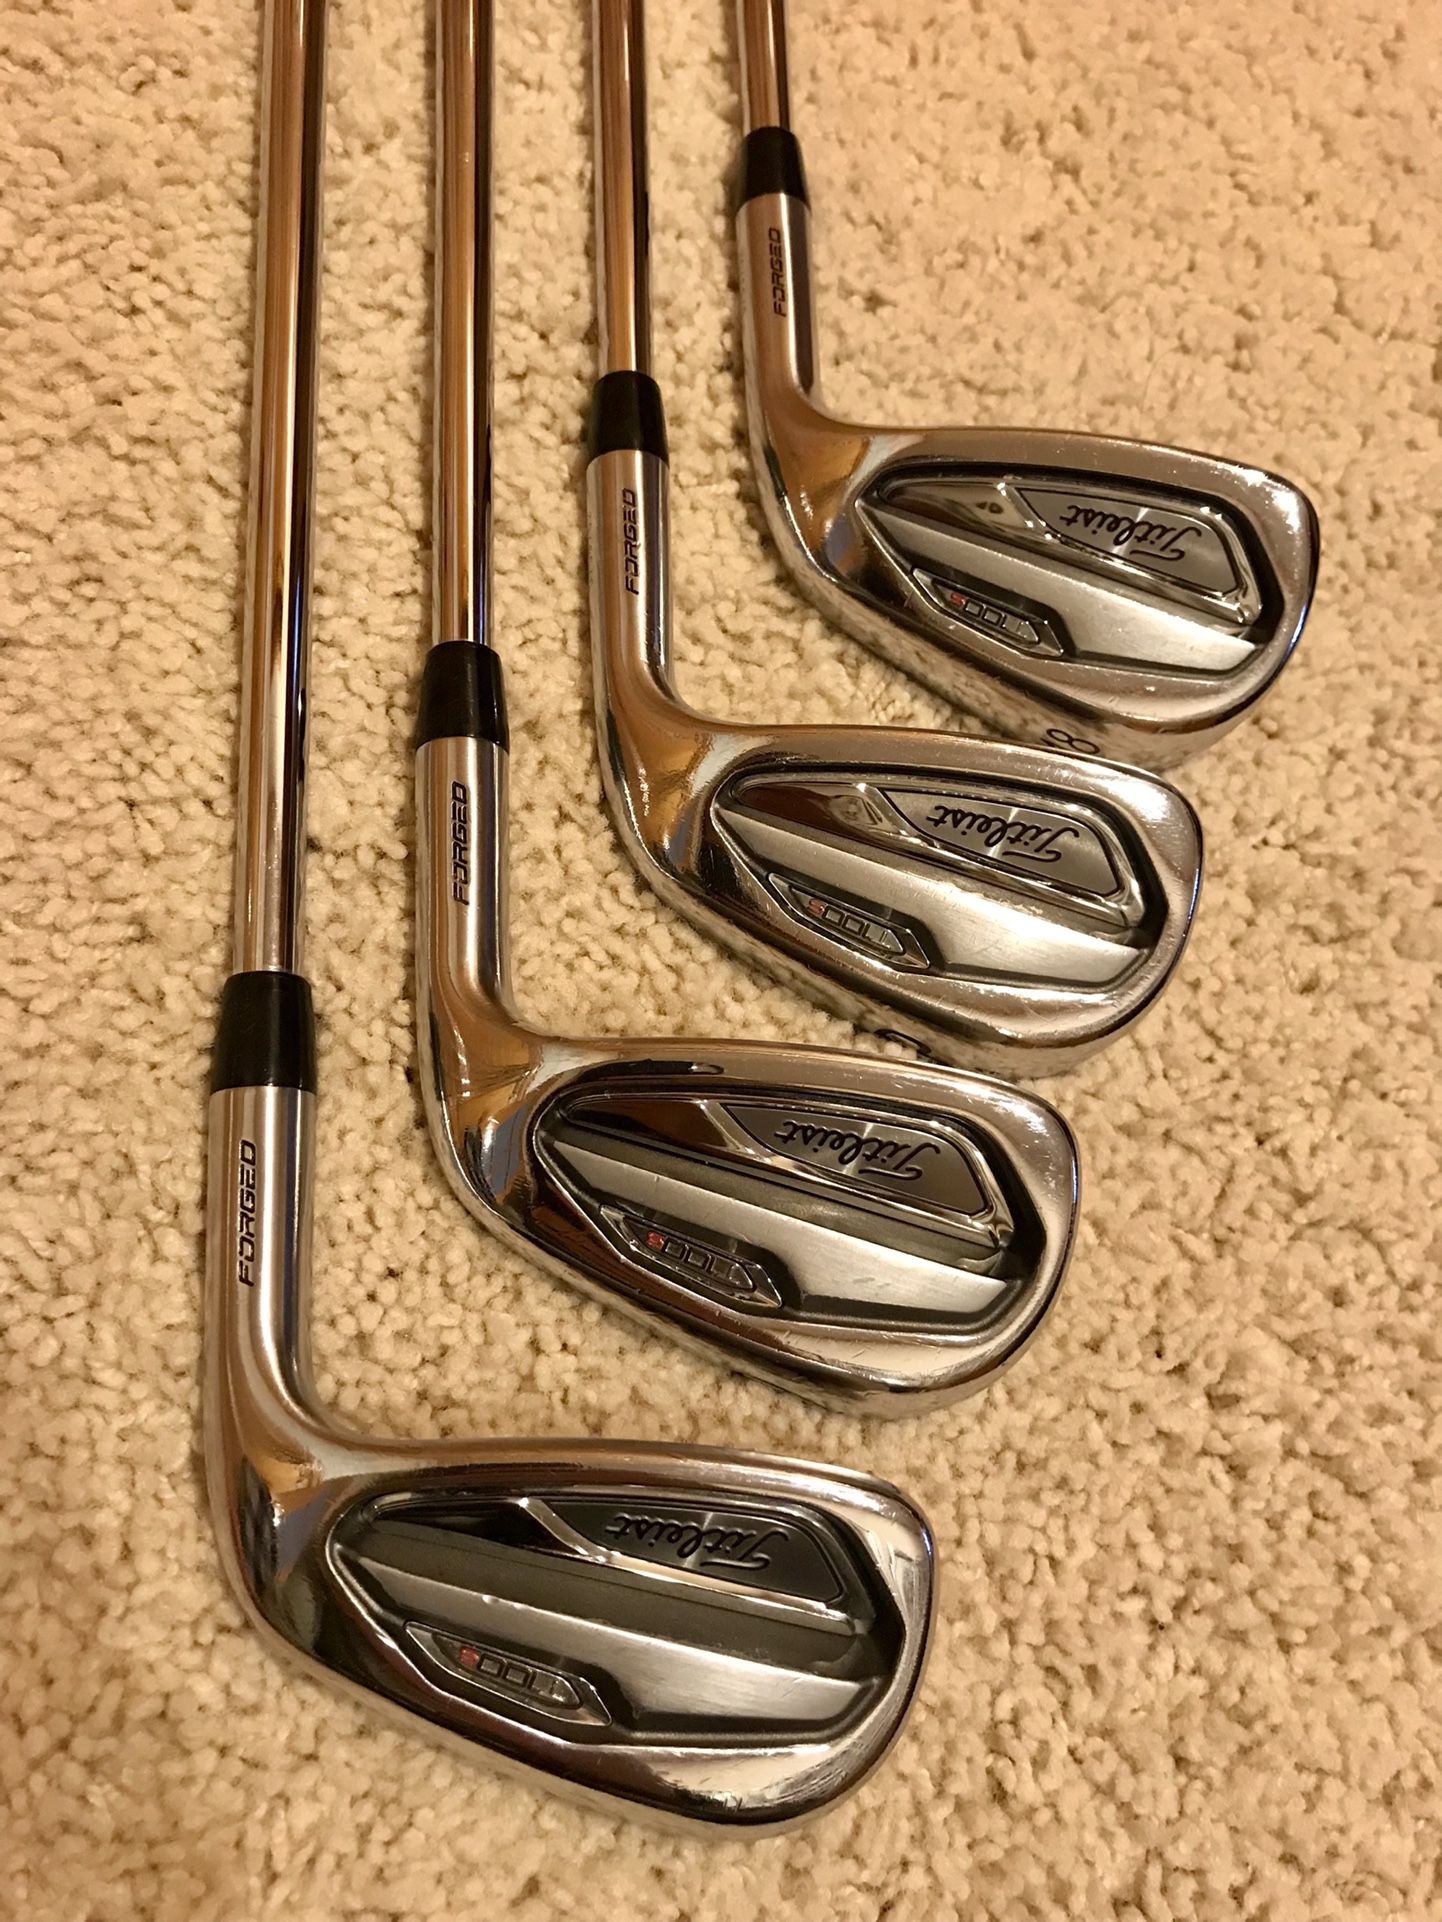 2020 Titleist T100s (4-GW) with Project X LZ 5.5 (115g)